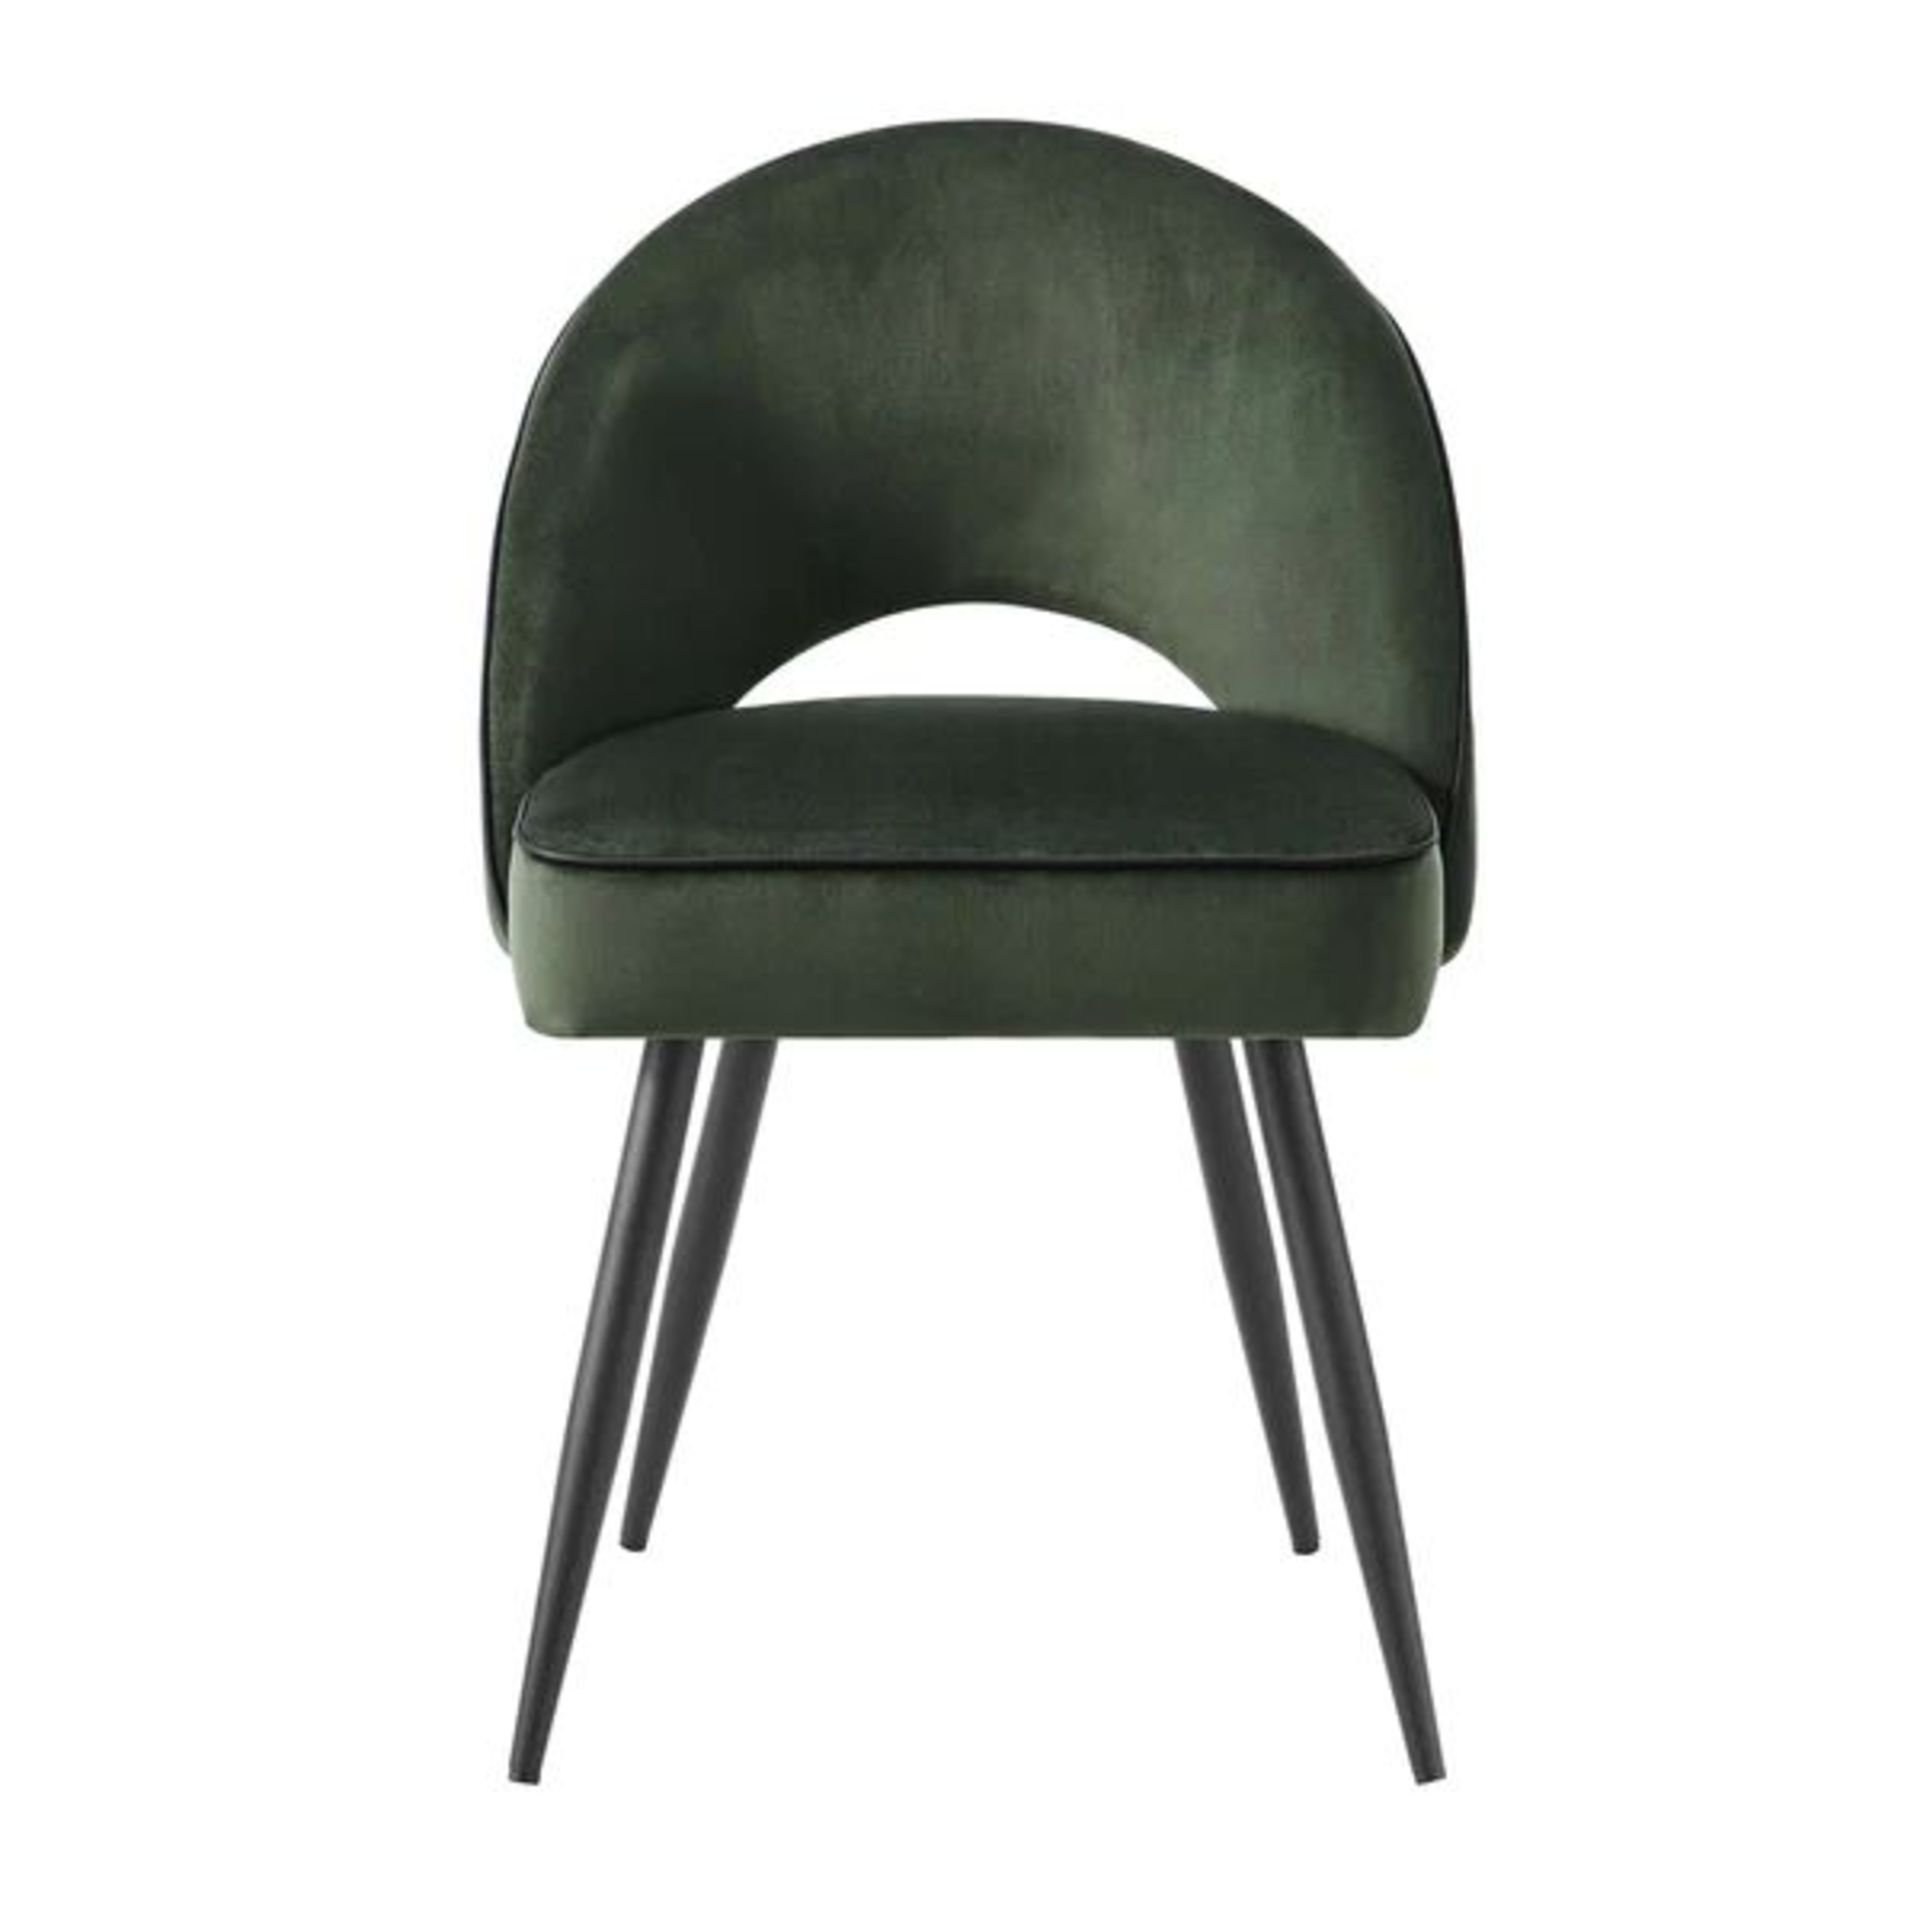 Oakley Set of 2 Dark Green Velvet Upholstered Dining Chairs with Contrast Piping. - R14. RRP £259. - Image 2 of 2